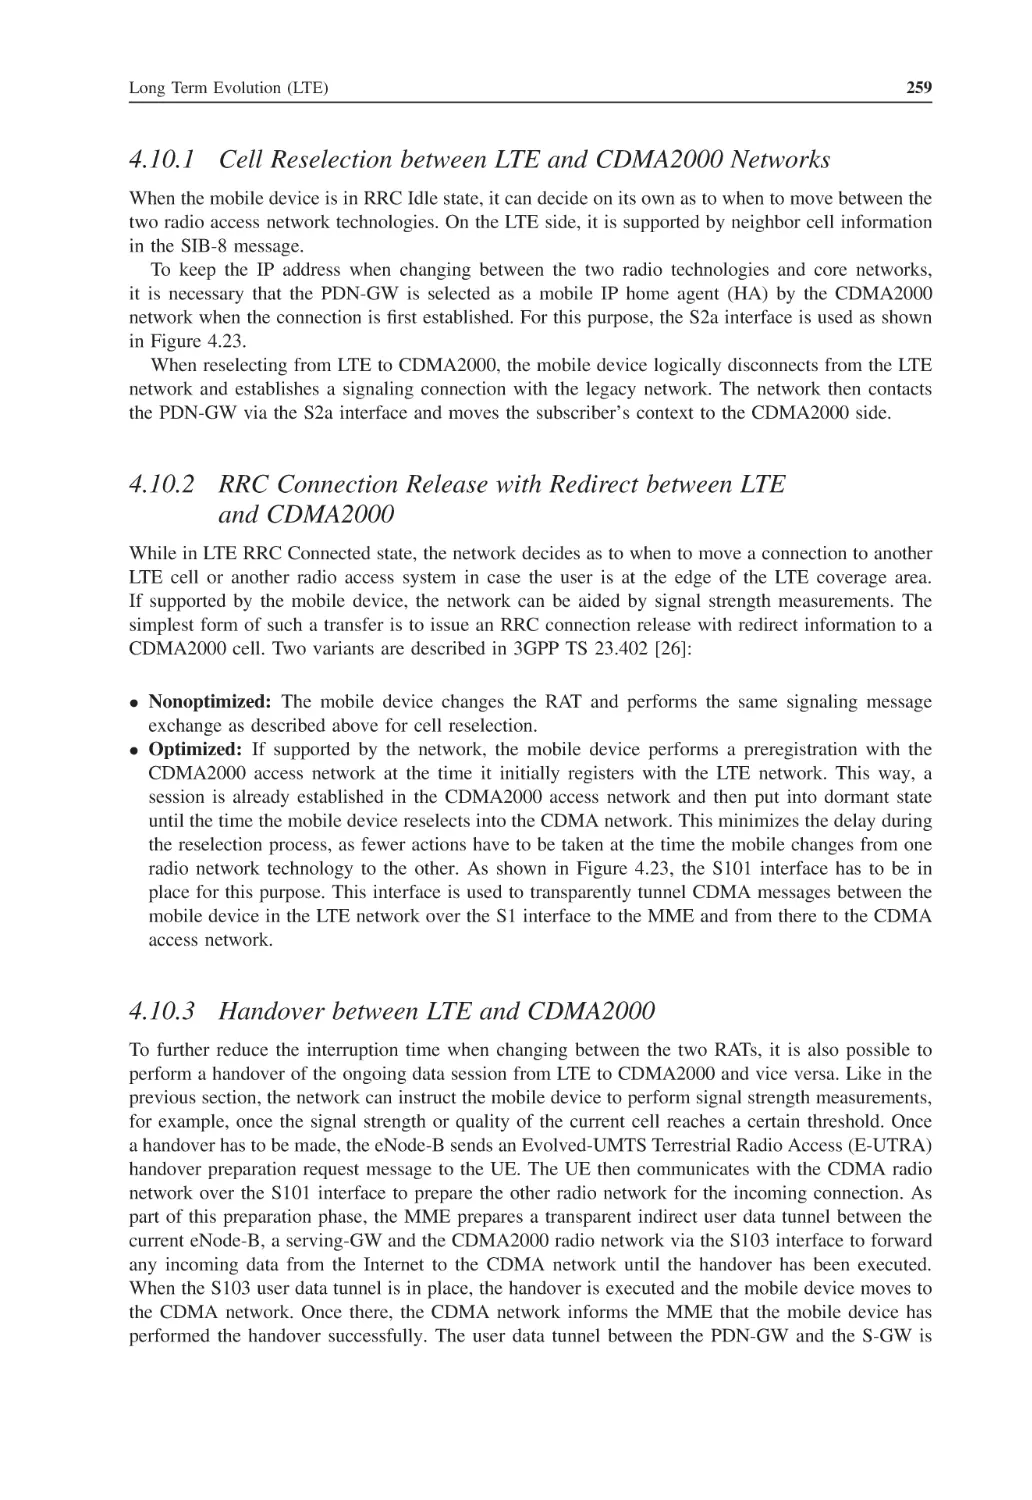 4.10.1 Cell Reselection between LTE and CDMA2000 Networks
4.10.2 RRC Connection Release with Redirect between LTE and CDMA2000
4.10.3 Handover between LTE and CDMA2000